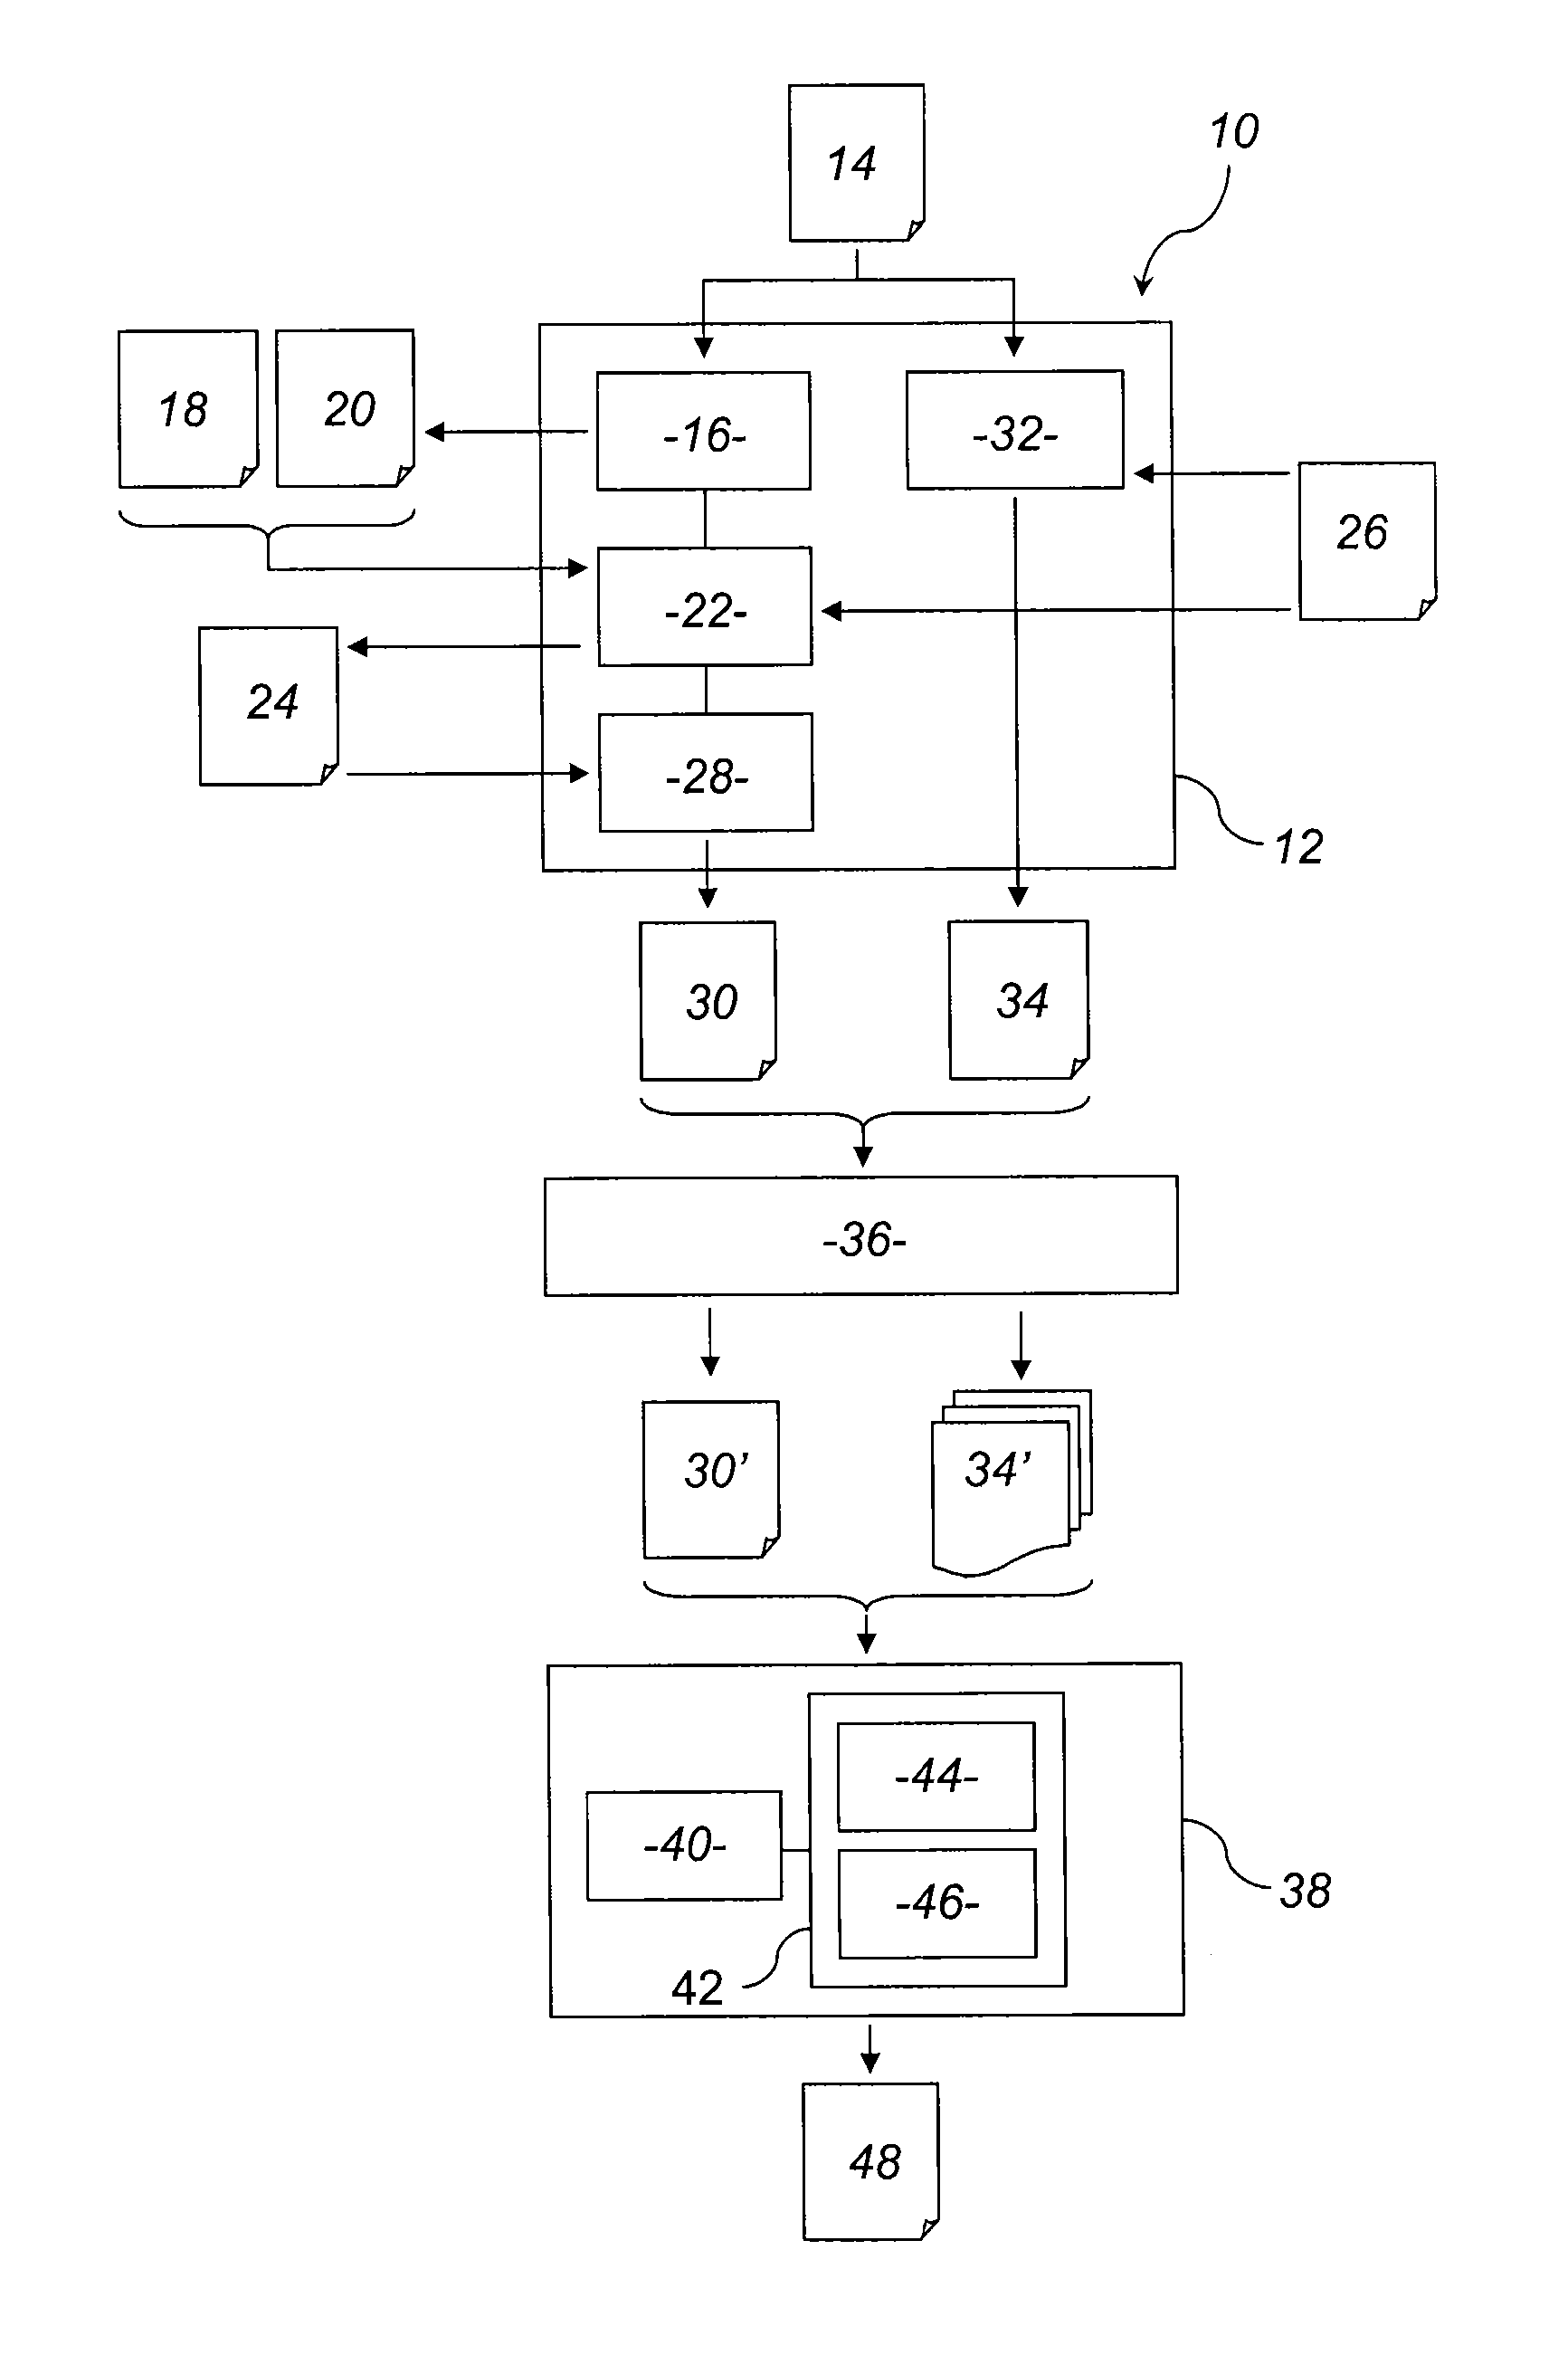 System and method for designing digital circuitry with an activity sensor